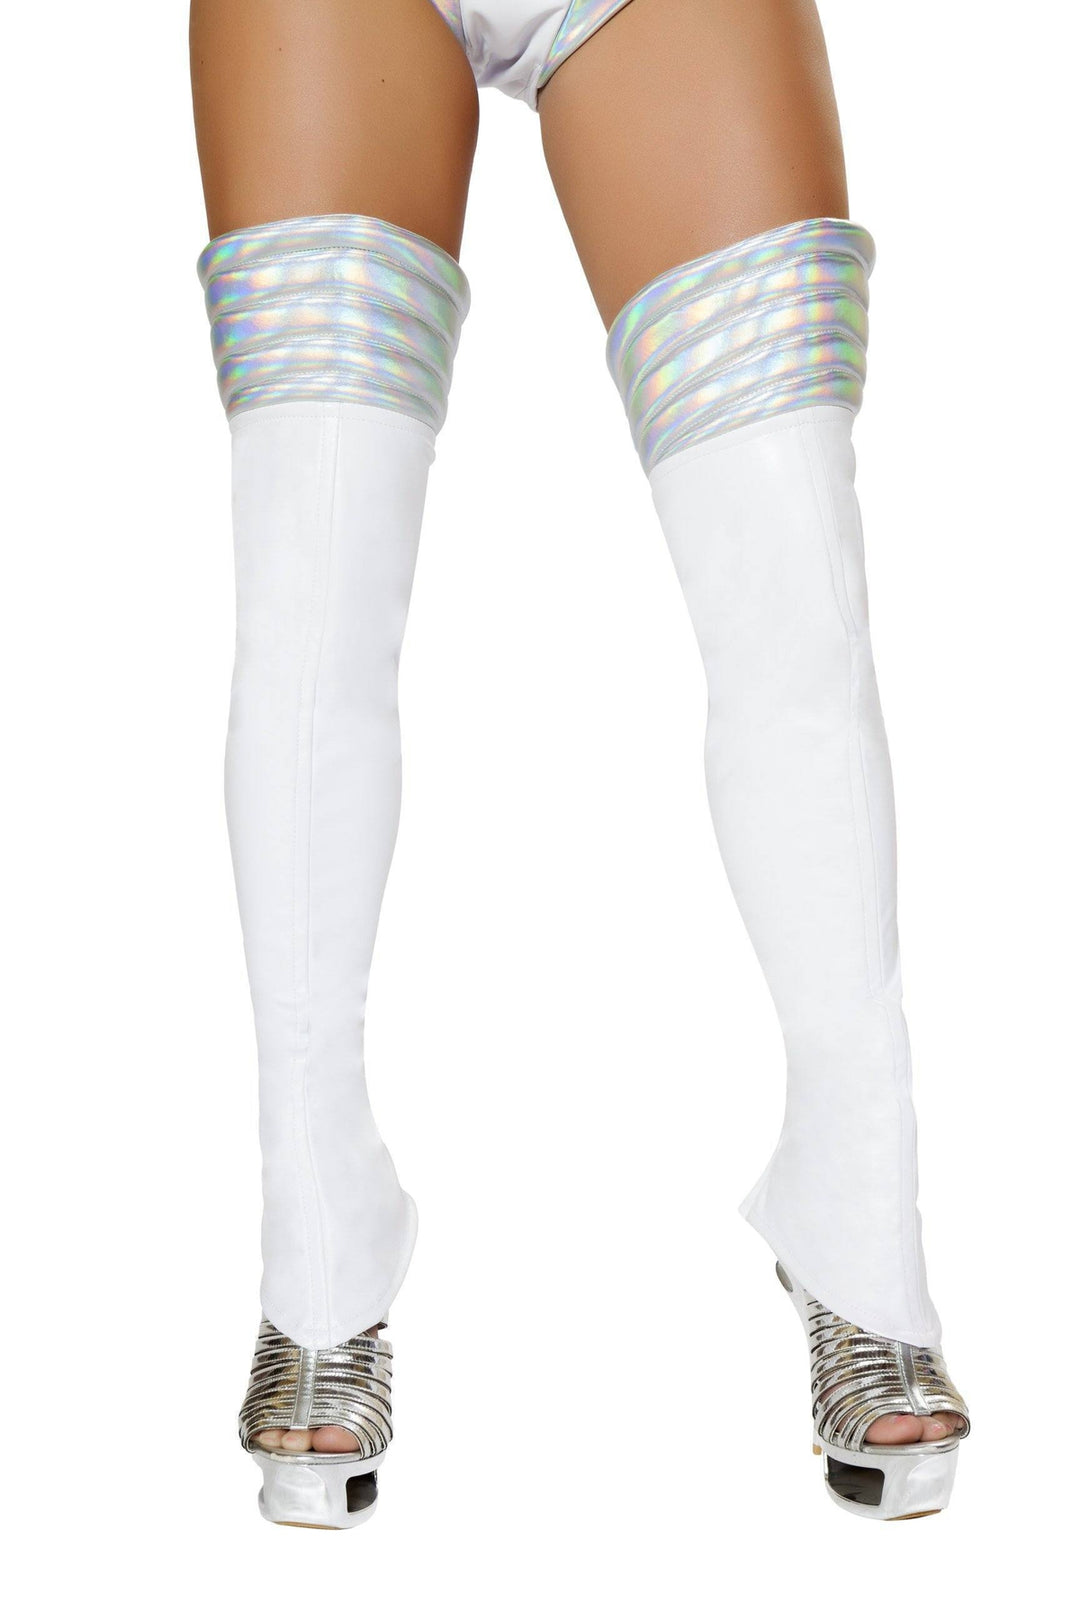 Roma White Space Girl Leggings Costume-SEXYSHOES.COM